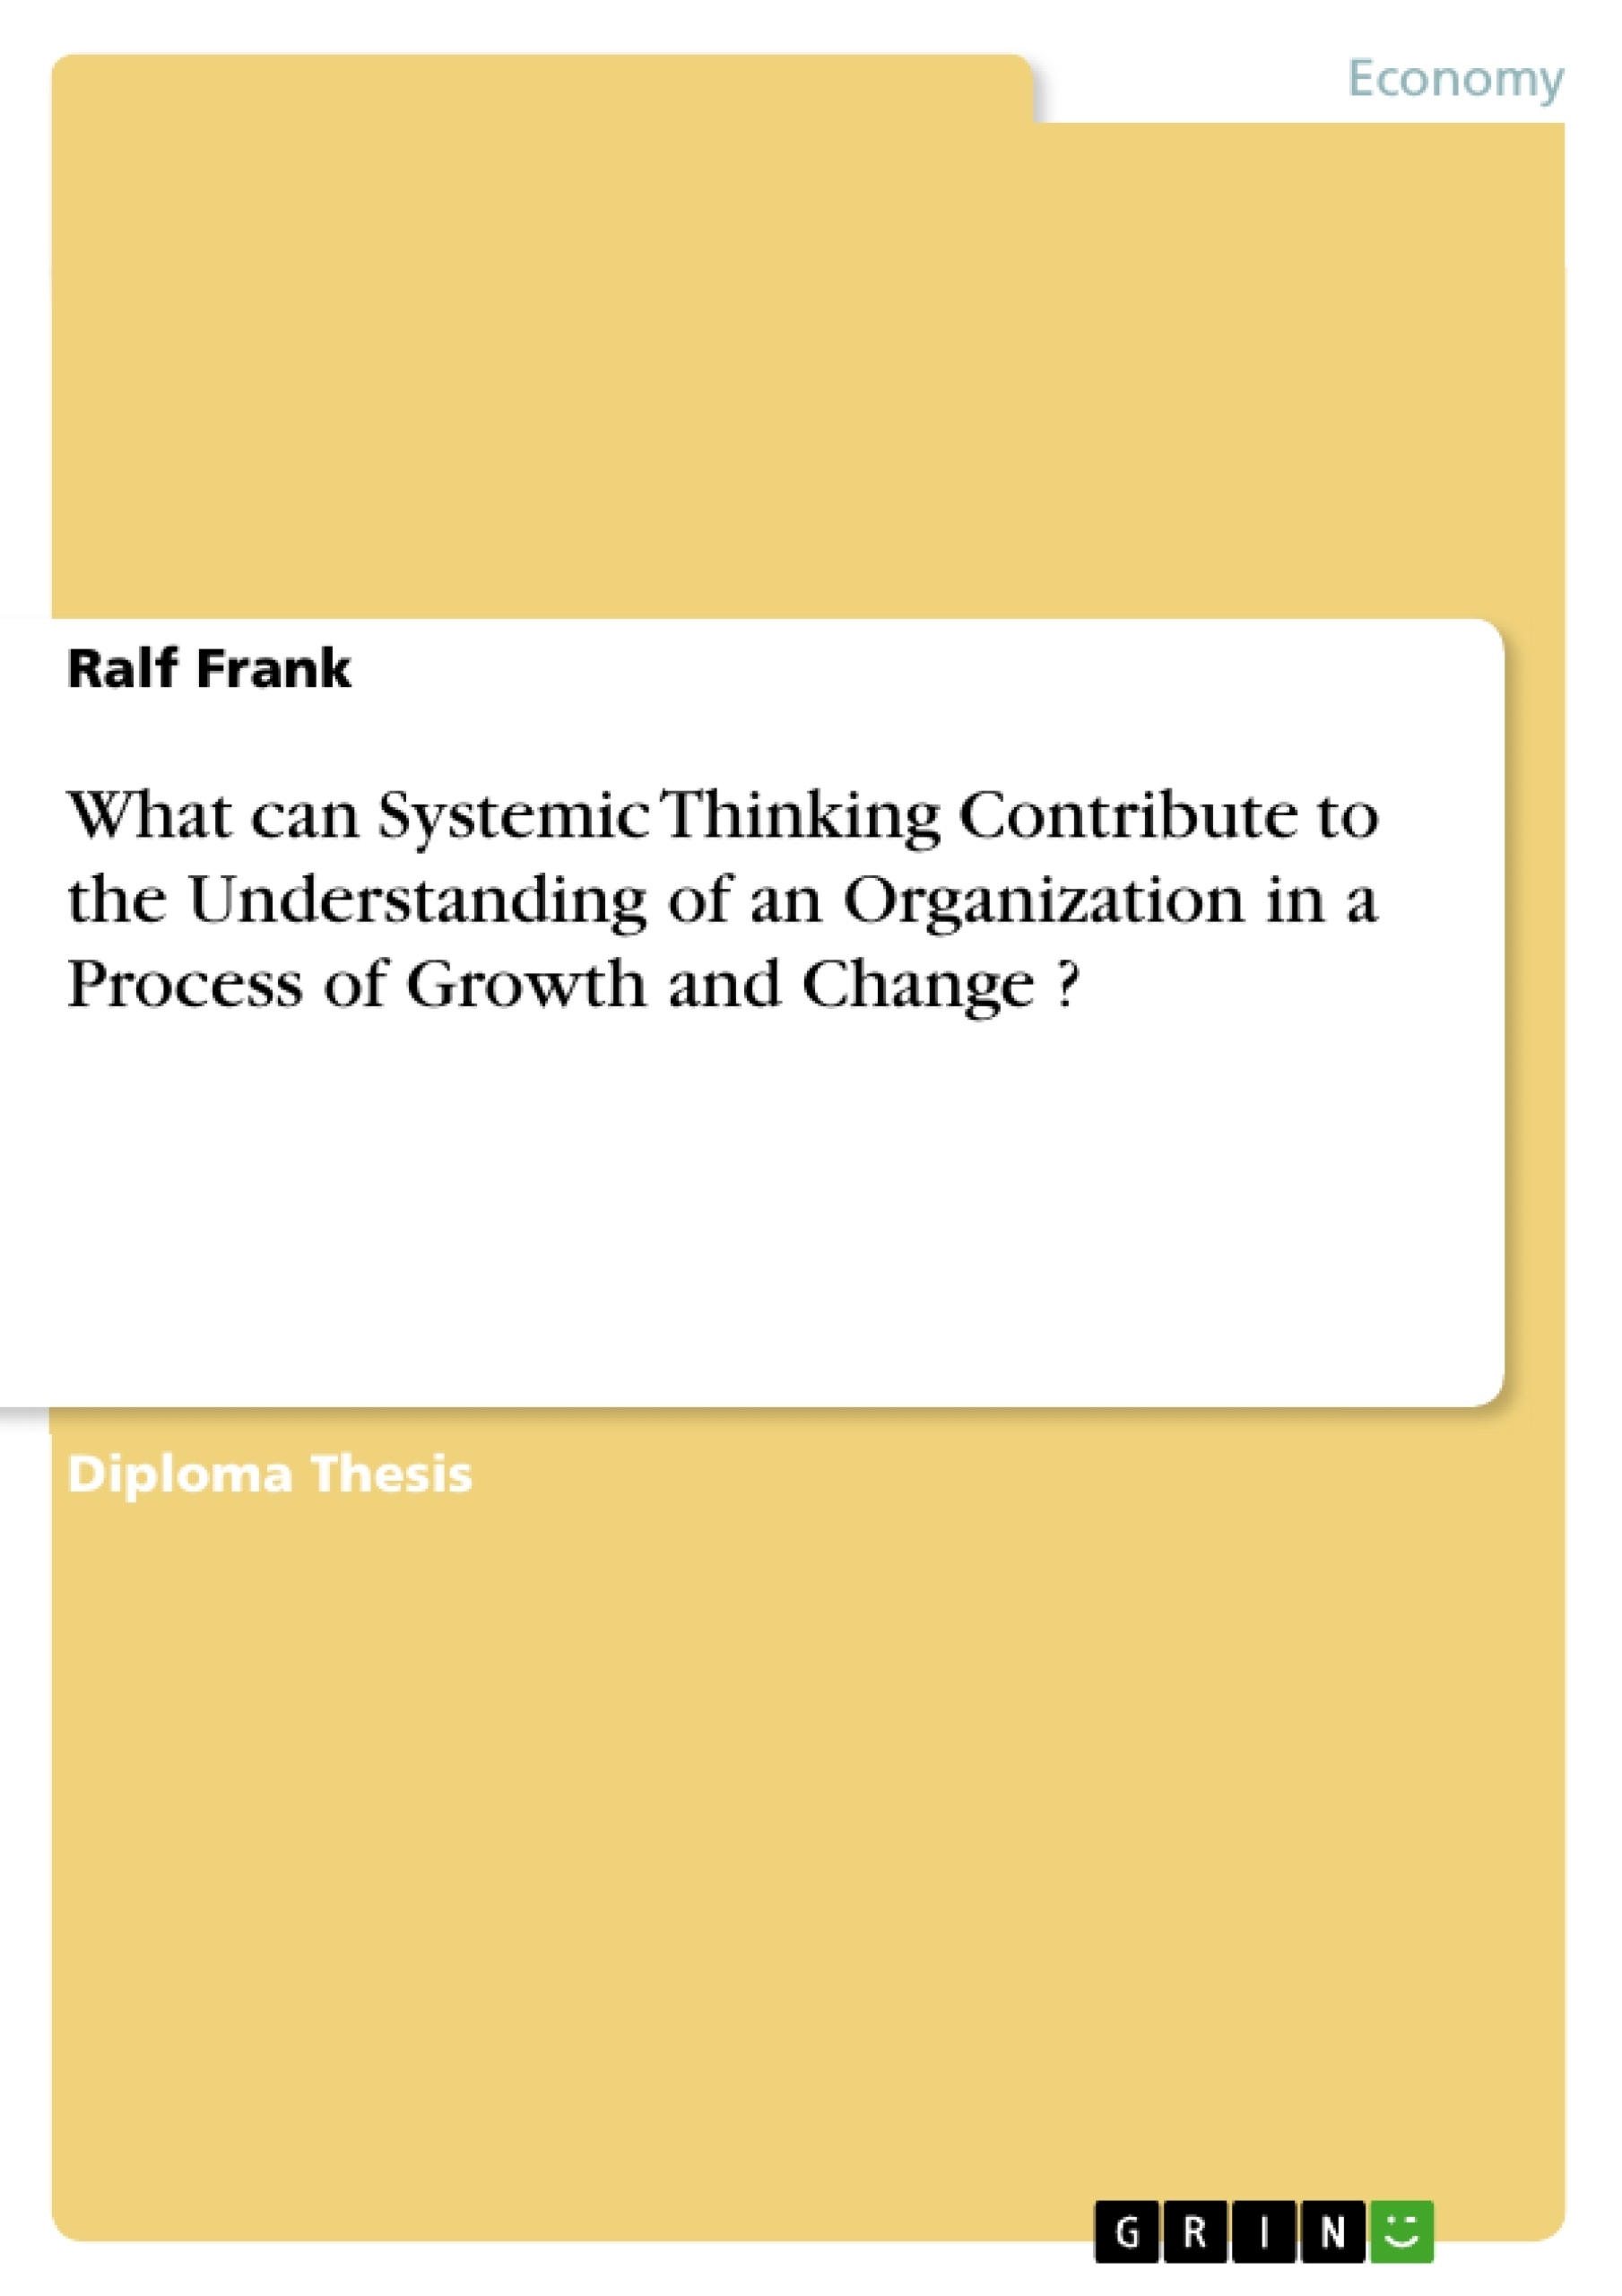 Title: What can Systemic Thinking Contribute to the Understanding of an Organization in a Process of Growth and Change ?